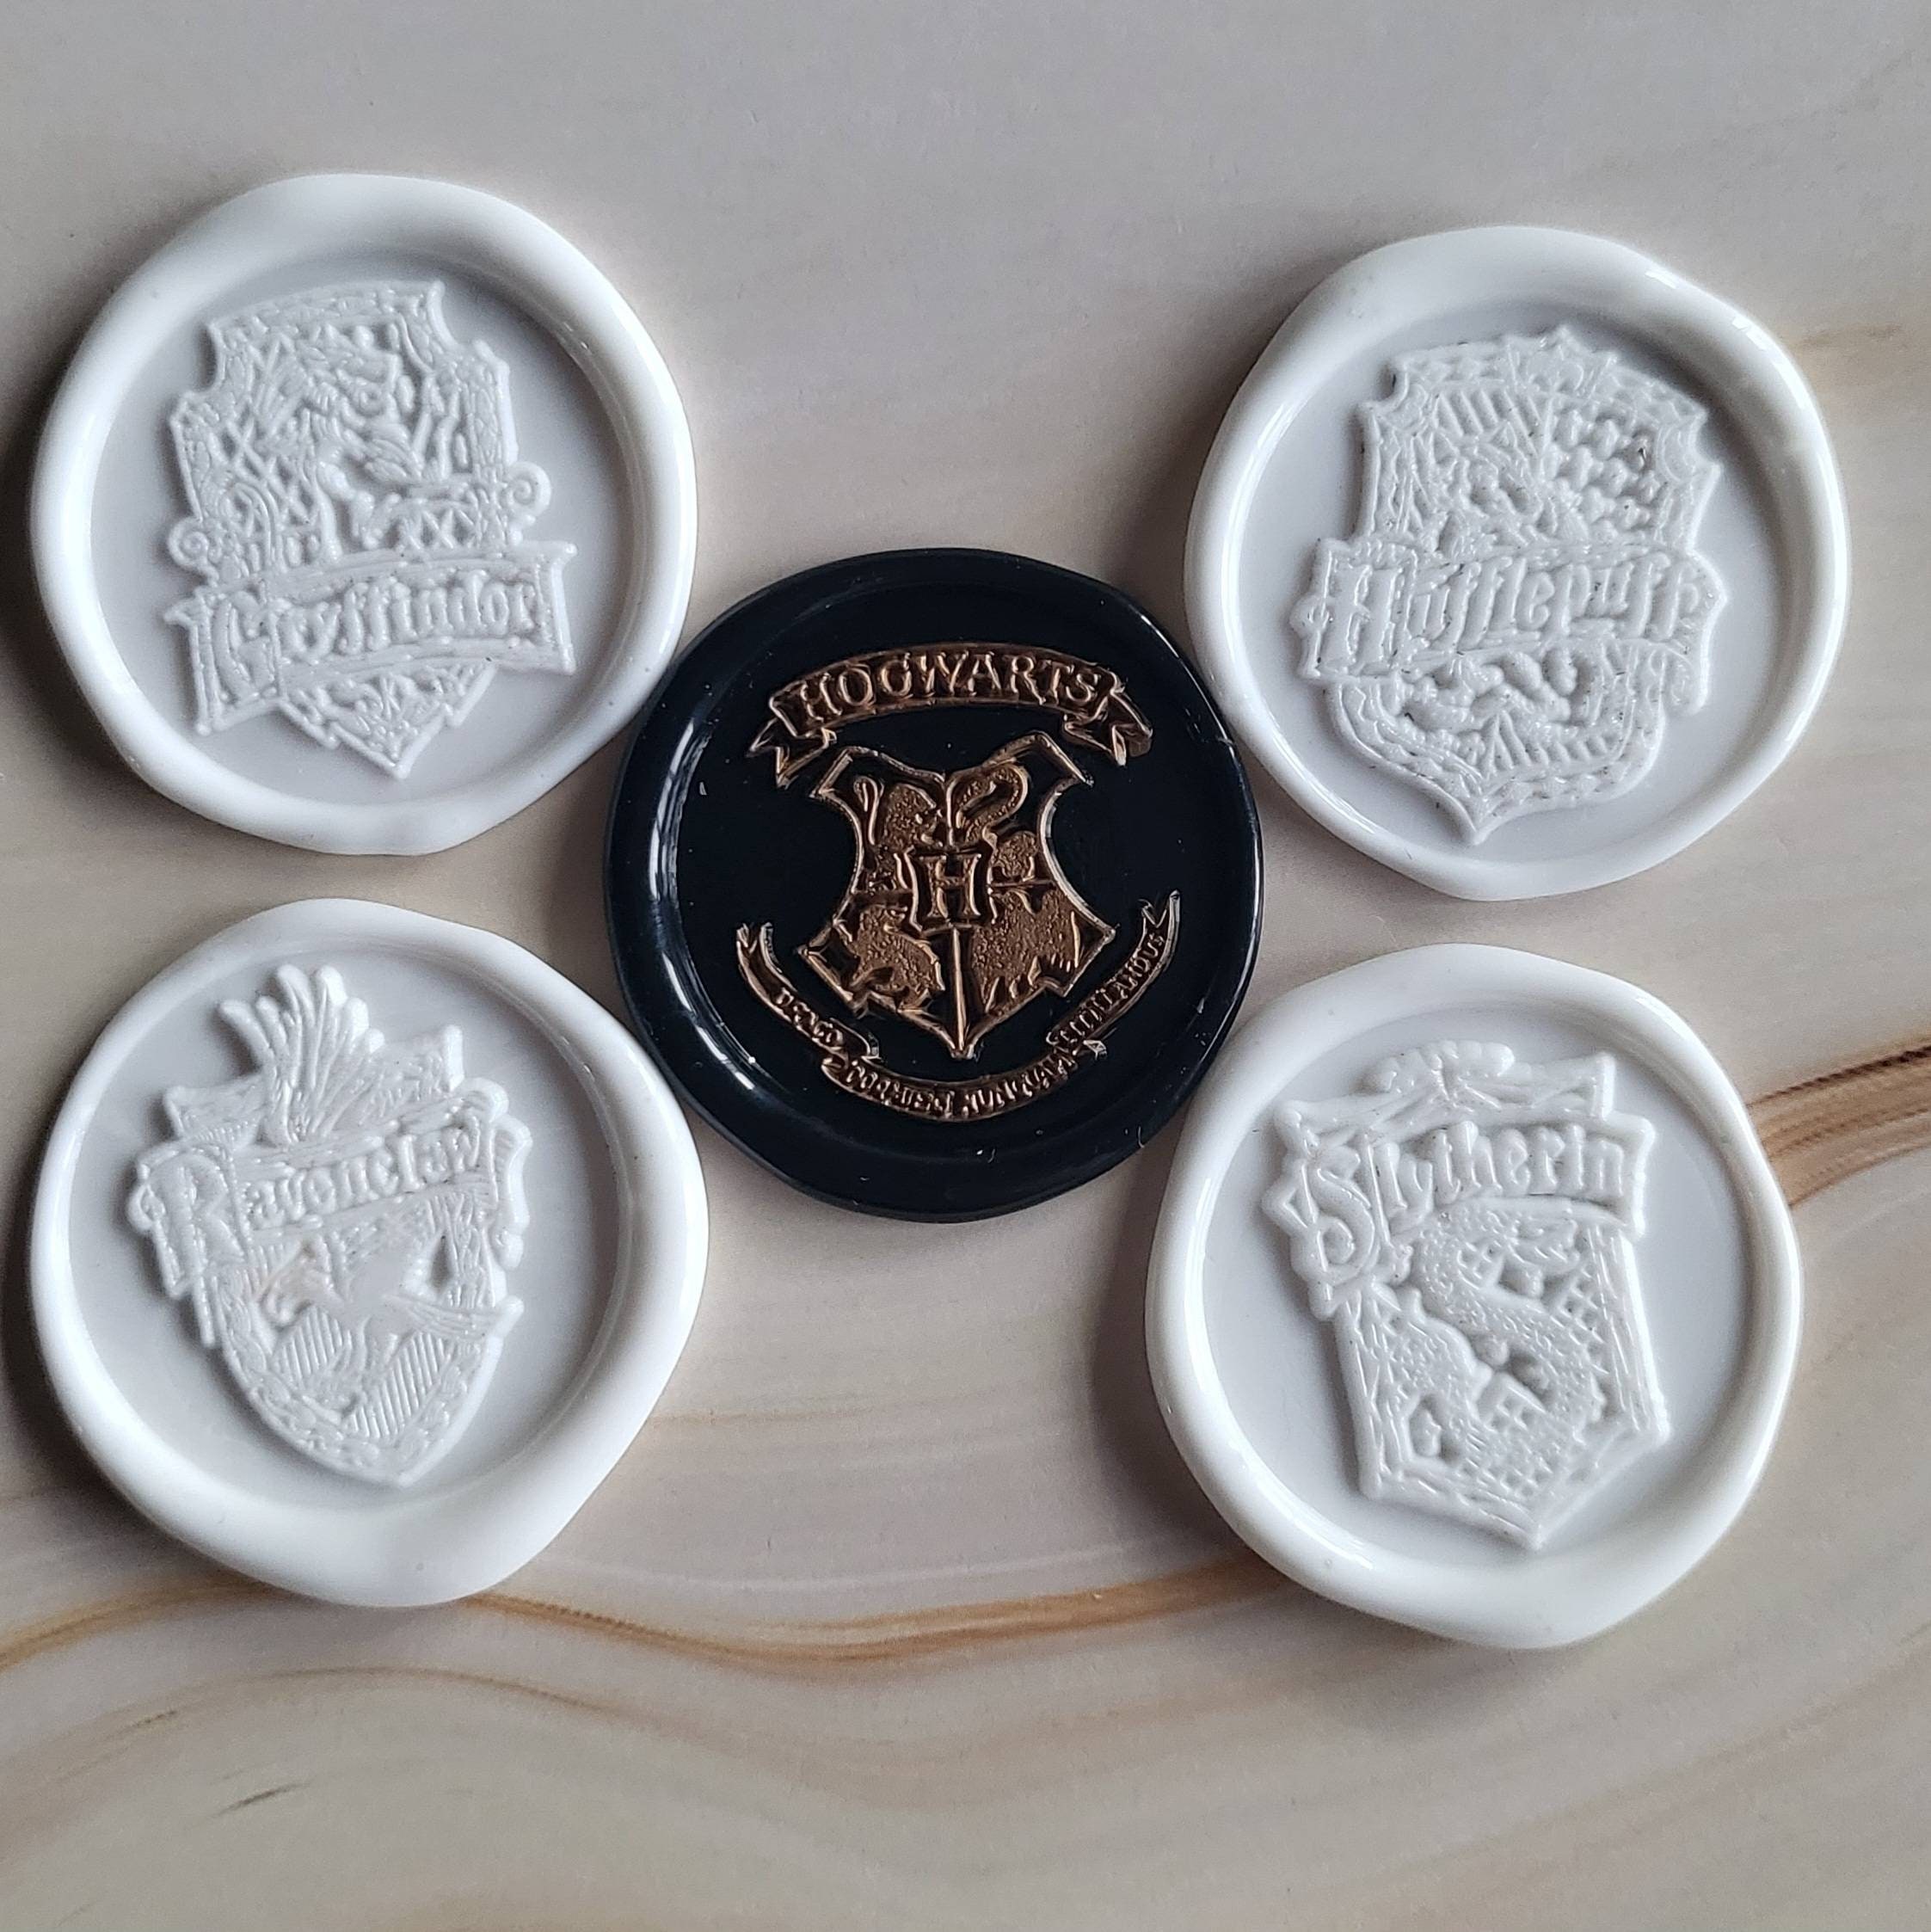 ZWIN 7pcs Hogwarts Wax Stamp Seals Kit with Classic Vintage Seal Wax Stamp Hogwarts Magic School Badge Retro Box As A Colloction and Gift